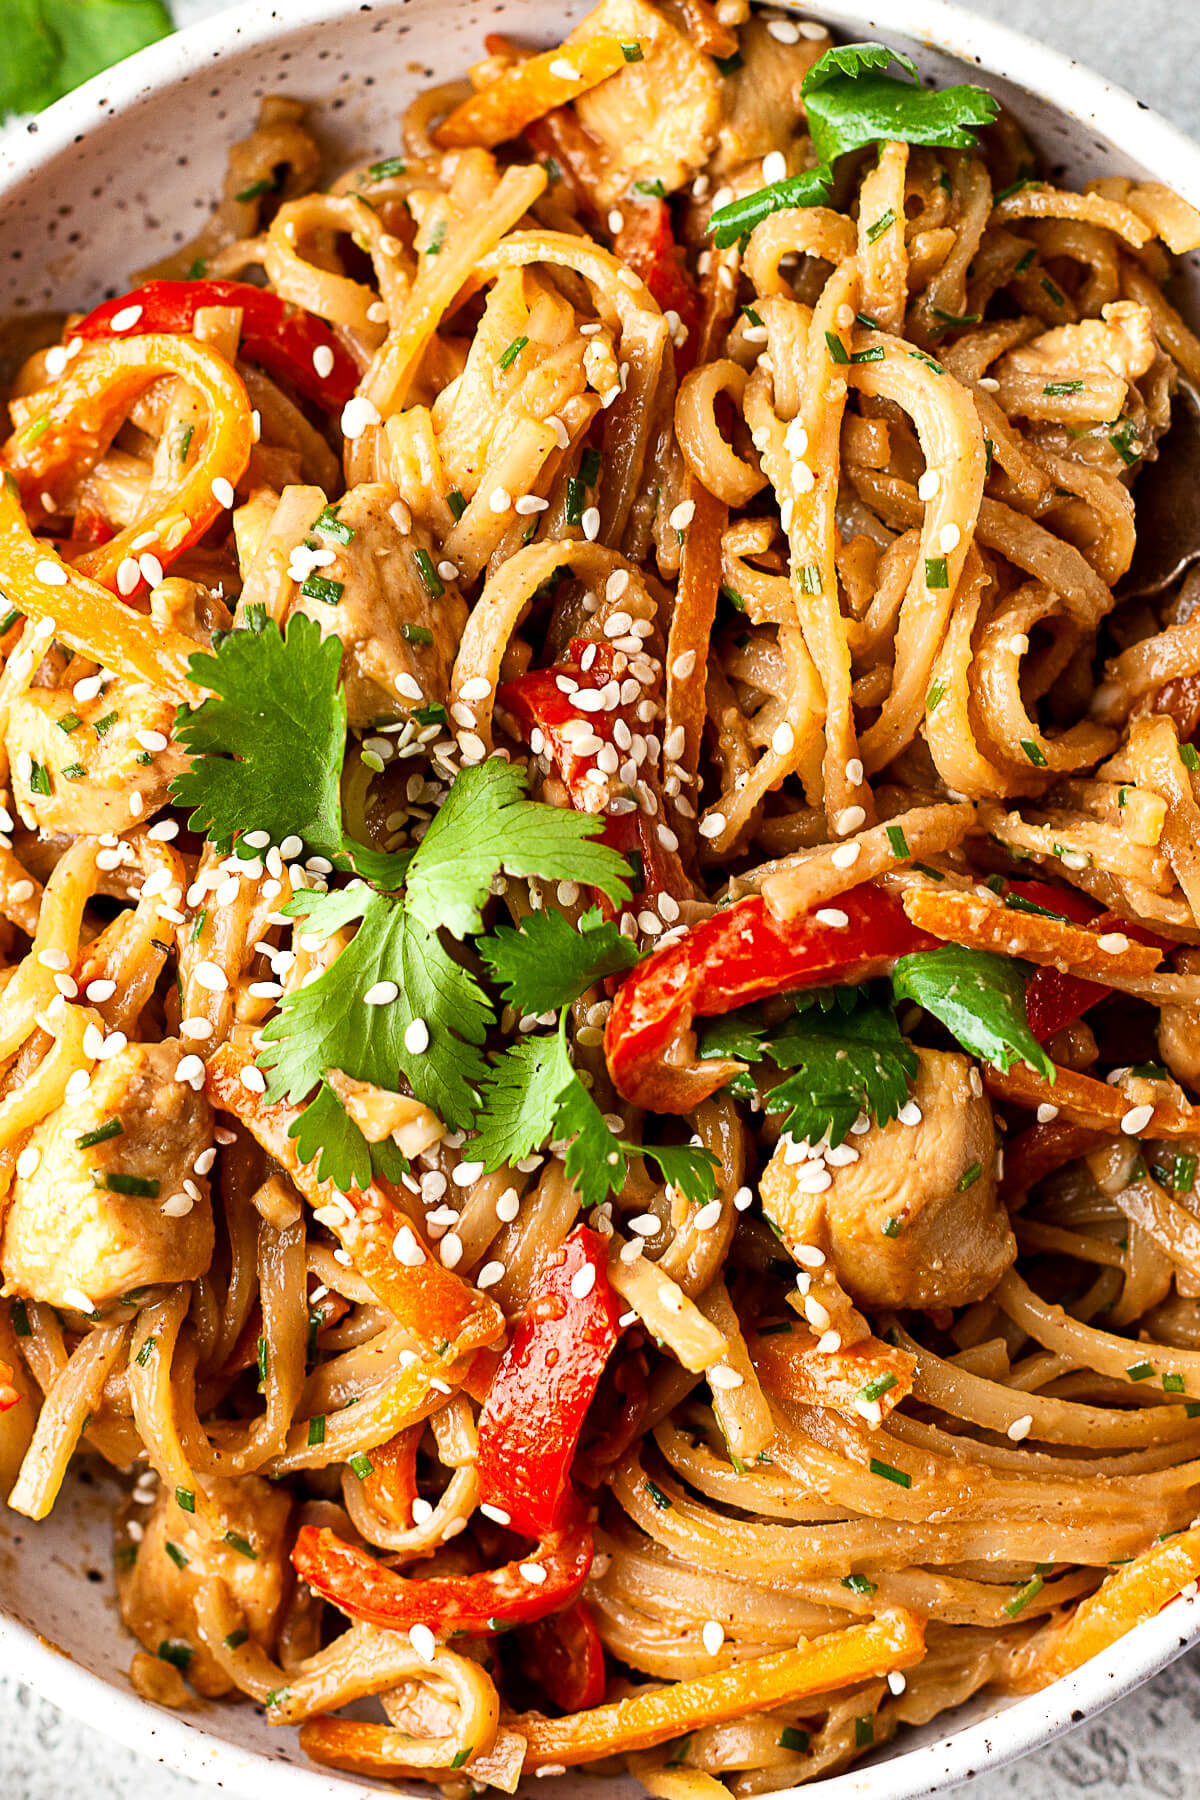 Spicy peanut noodles with red peppers, chicken, and carrots garnished with sesame seeds and fresh cilantro.